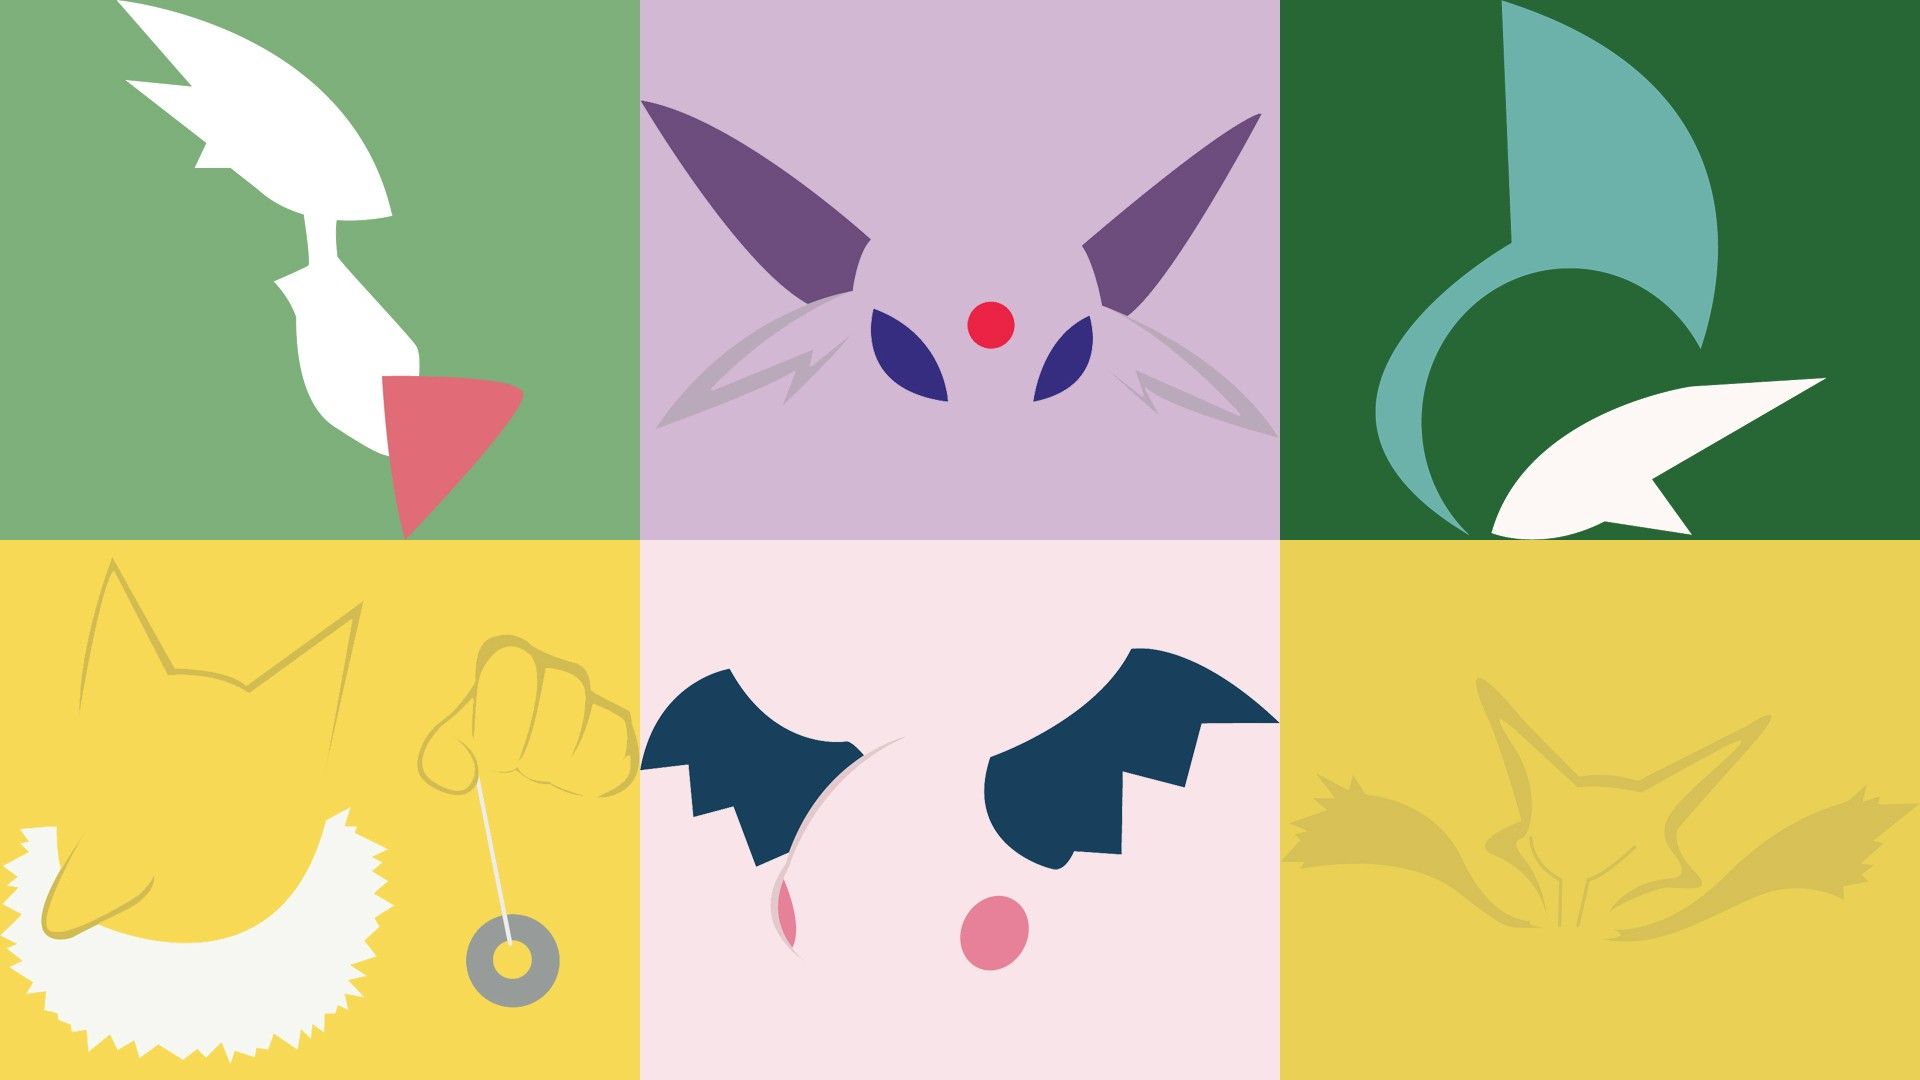 Ragercreeper's All Psychic Type Pokemon Wallpaper. These Image Can Be Found Gallery The493